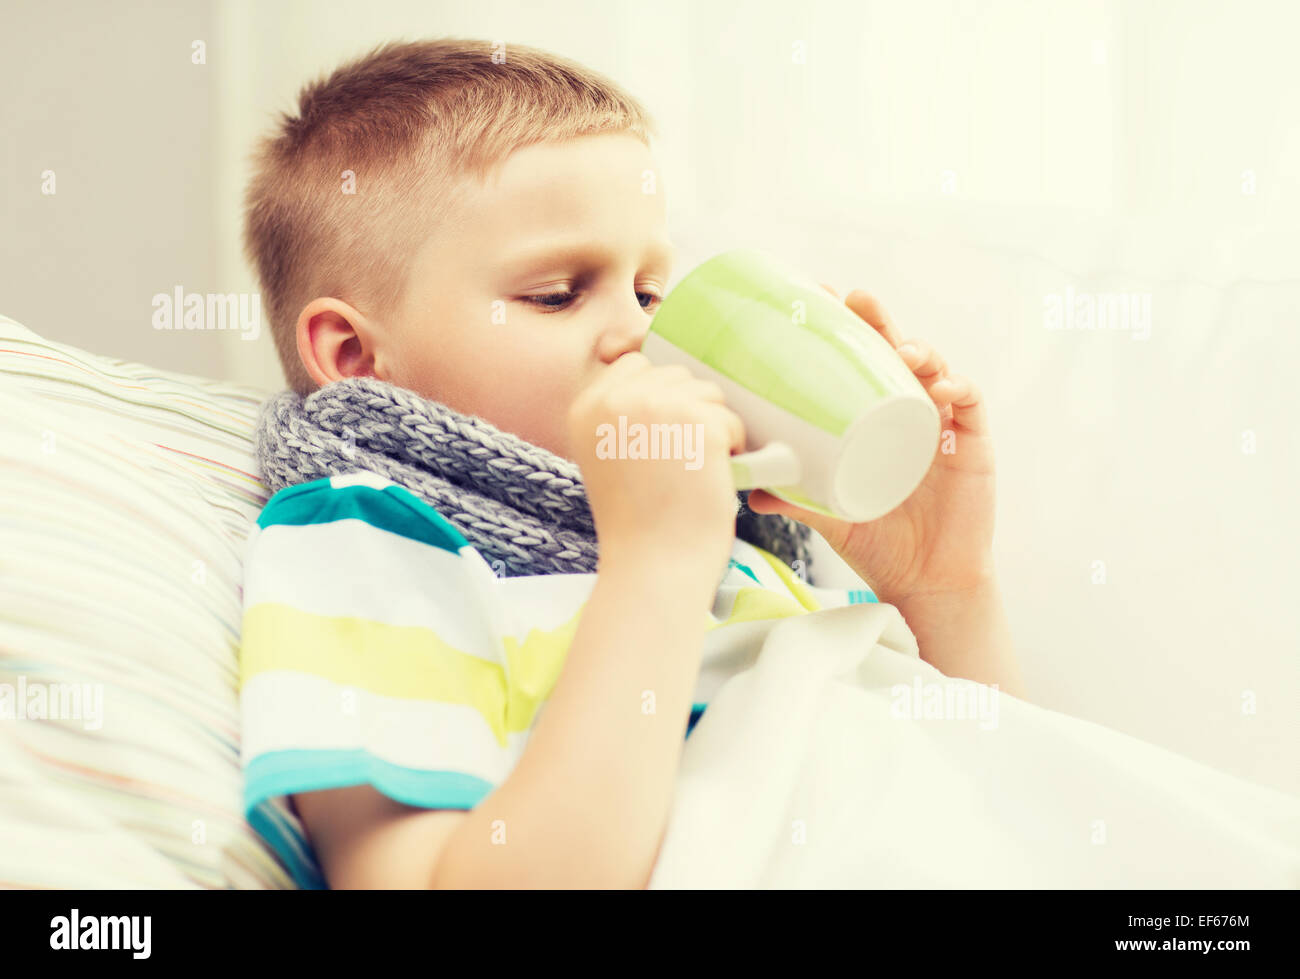 ill boy with flu at home Stock Photo